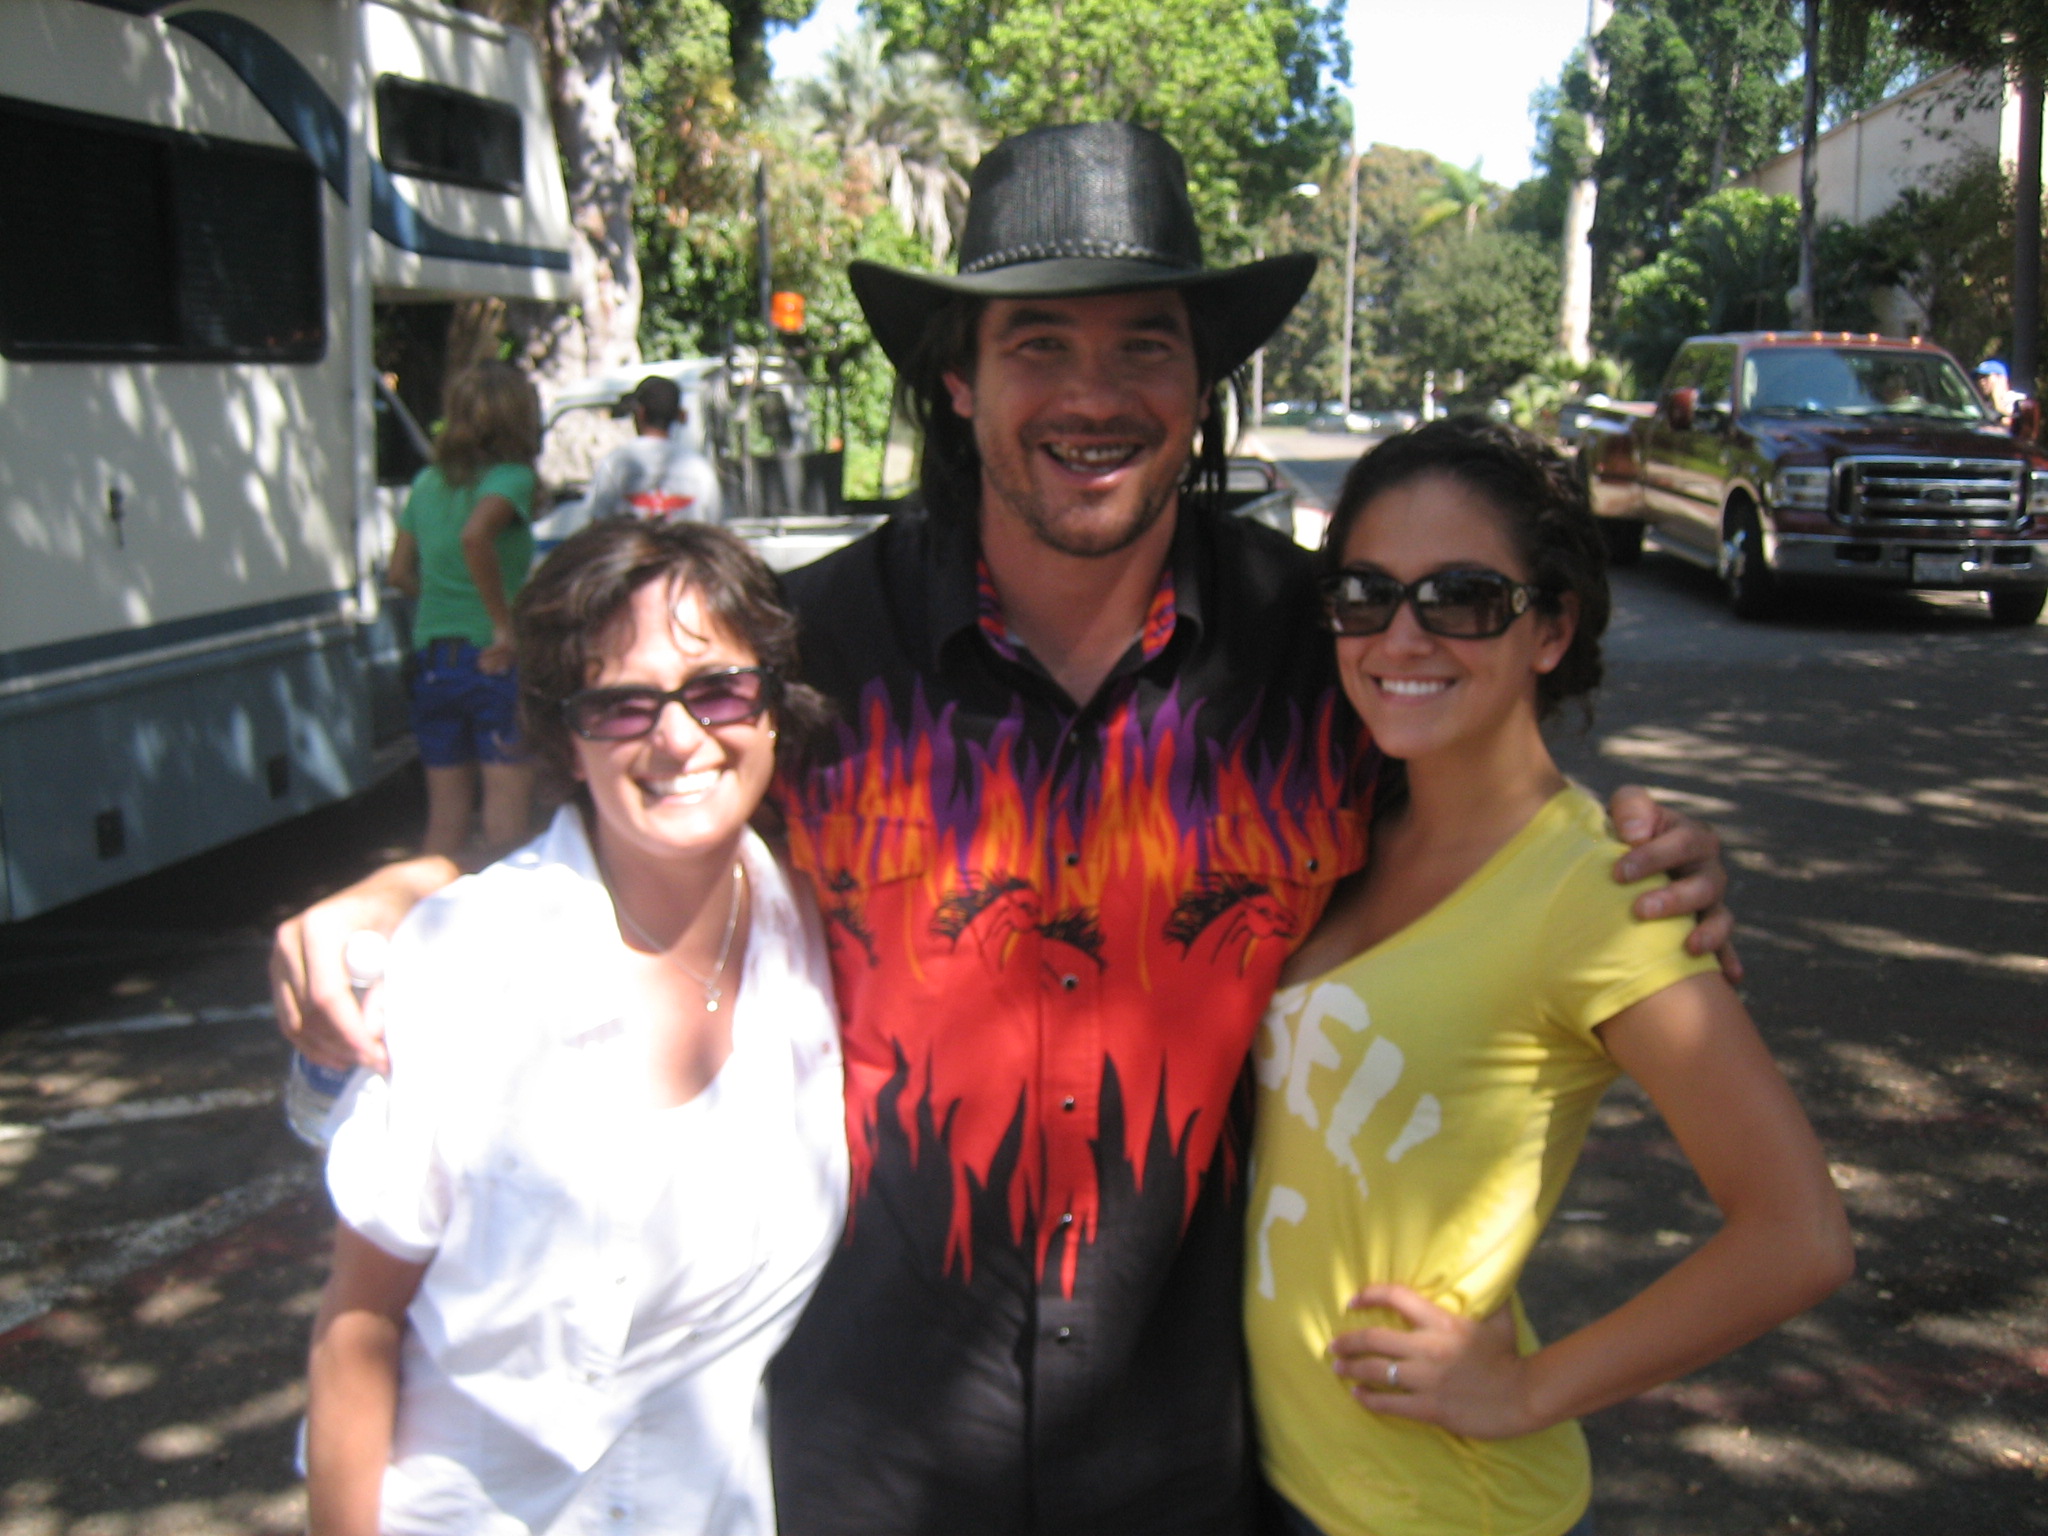 Vida Maine, Dean Cain and Brise Maine on the set of Hole in One.